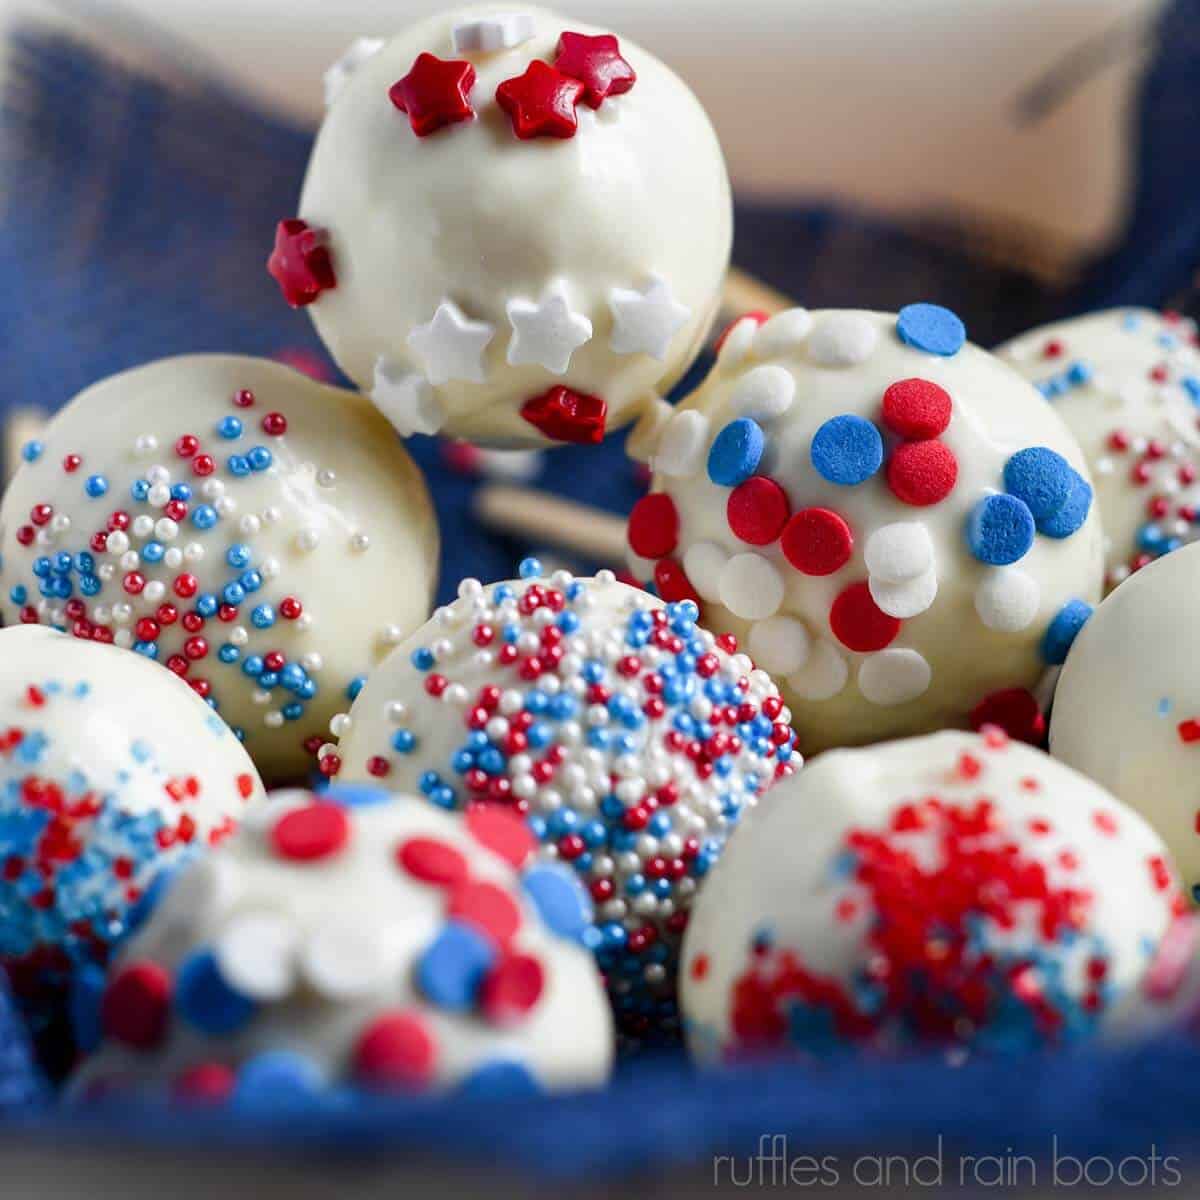 Square close up image of red, white, and blue July 4th cake pops stacked in a basket lined with a blue kitchen towel.